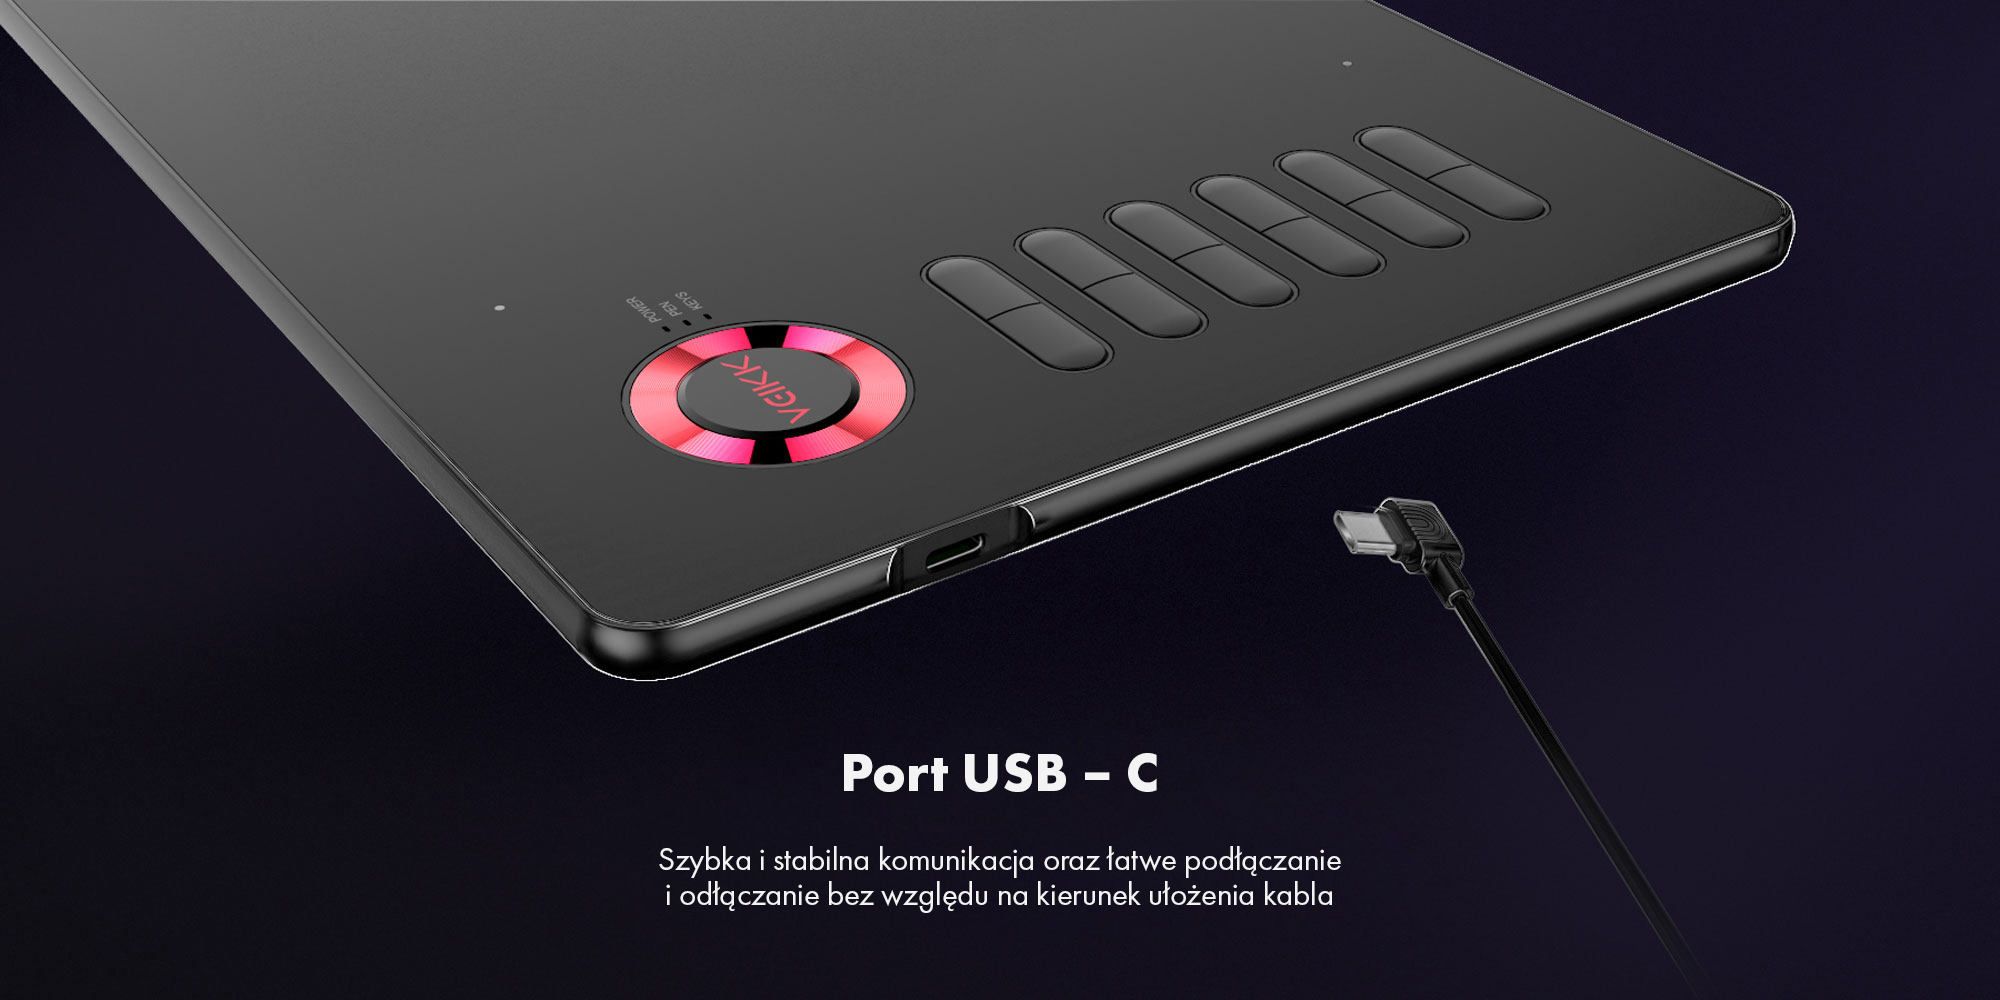 Graphic showing the USB-C port of the Veikk A15 graphics tablet